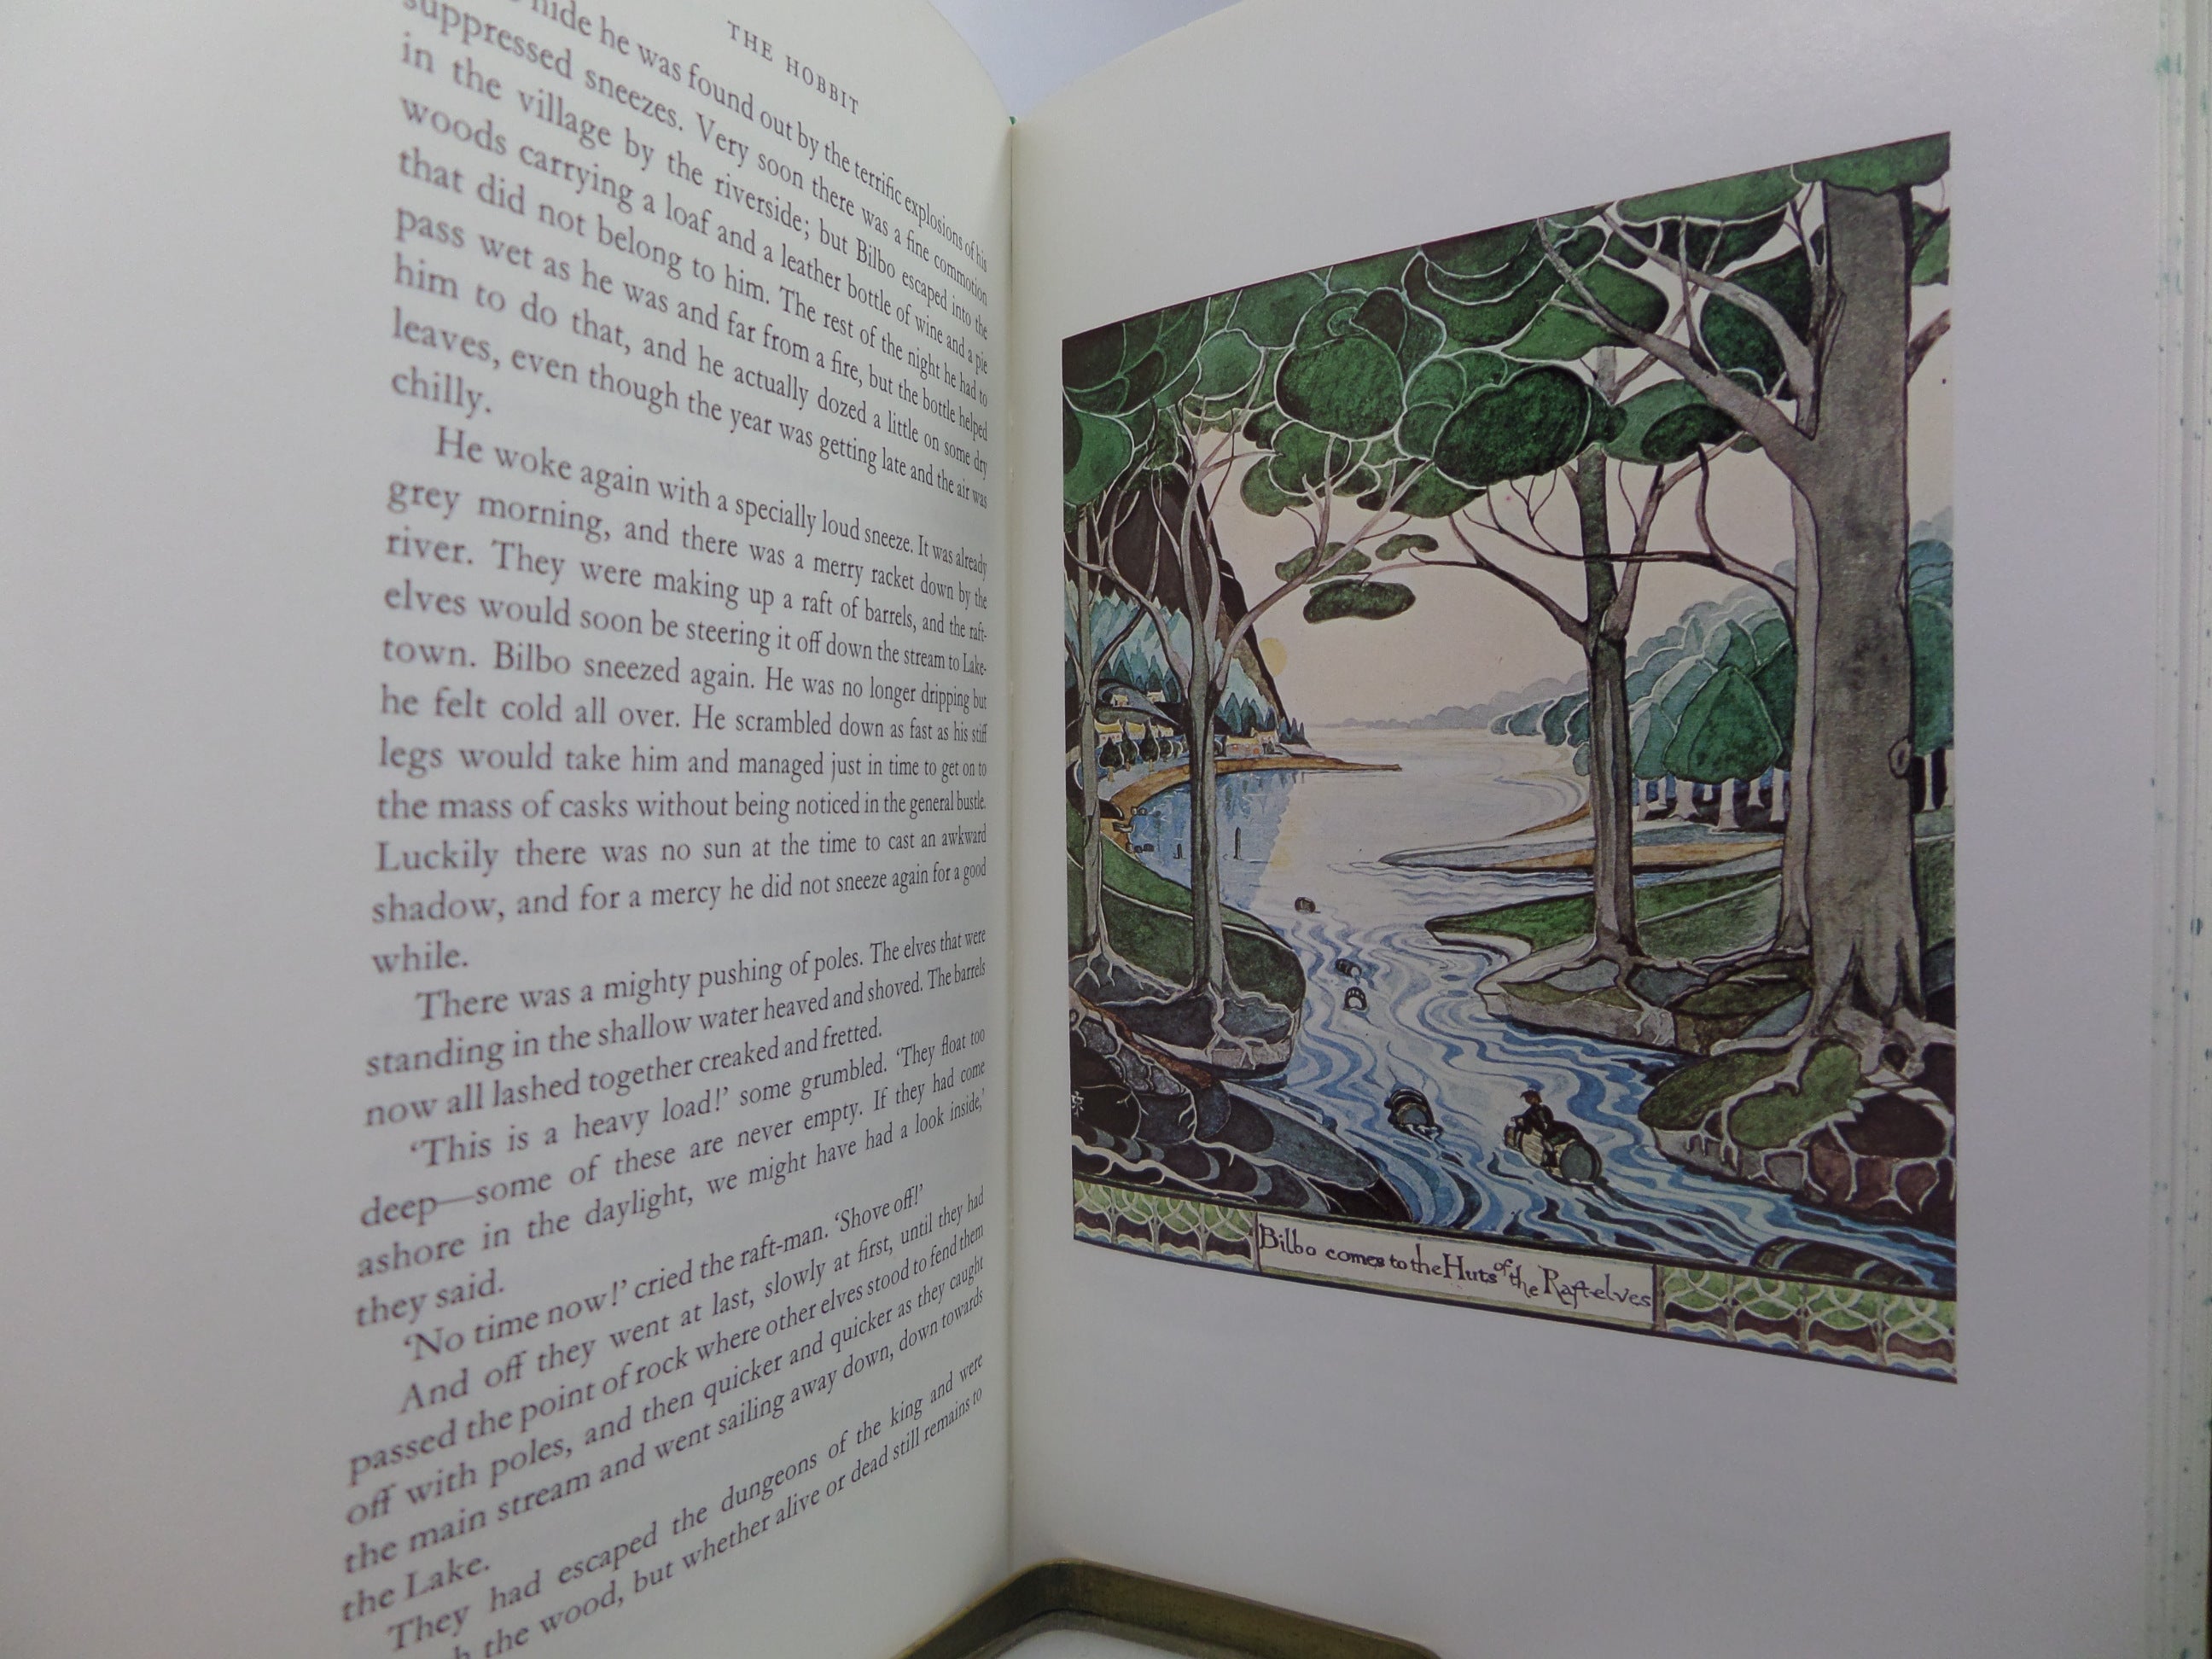 THE HOBBIT BY J. R. R. TOLKIEN 1979 DELUXE EDITION